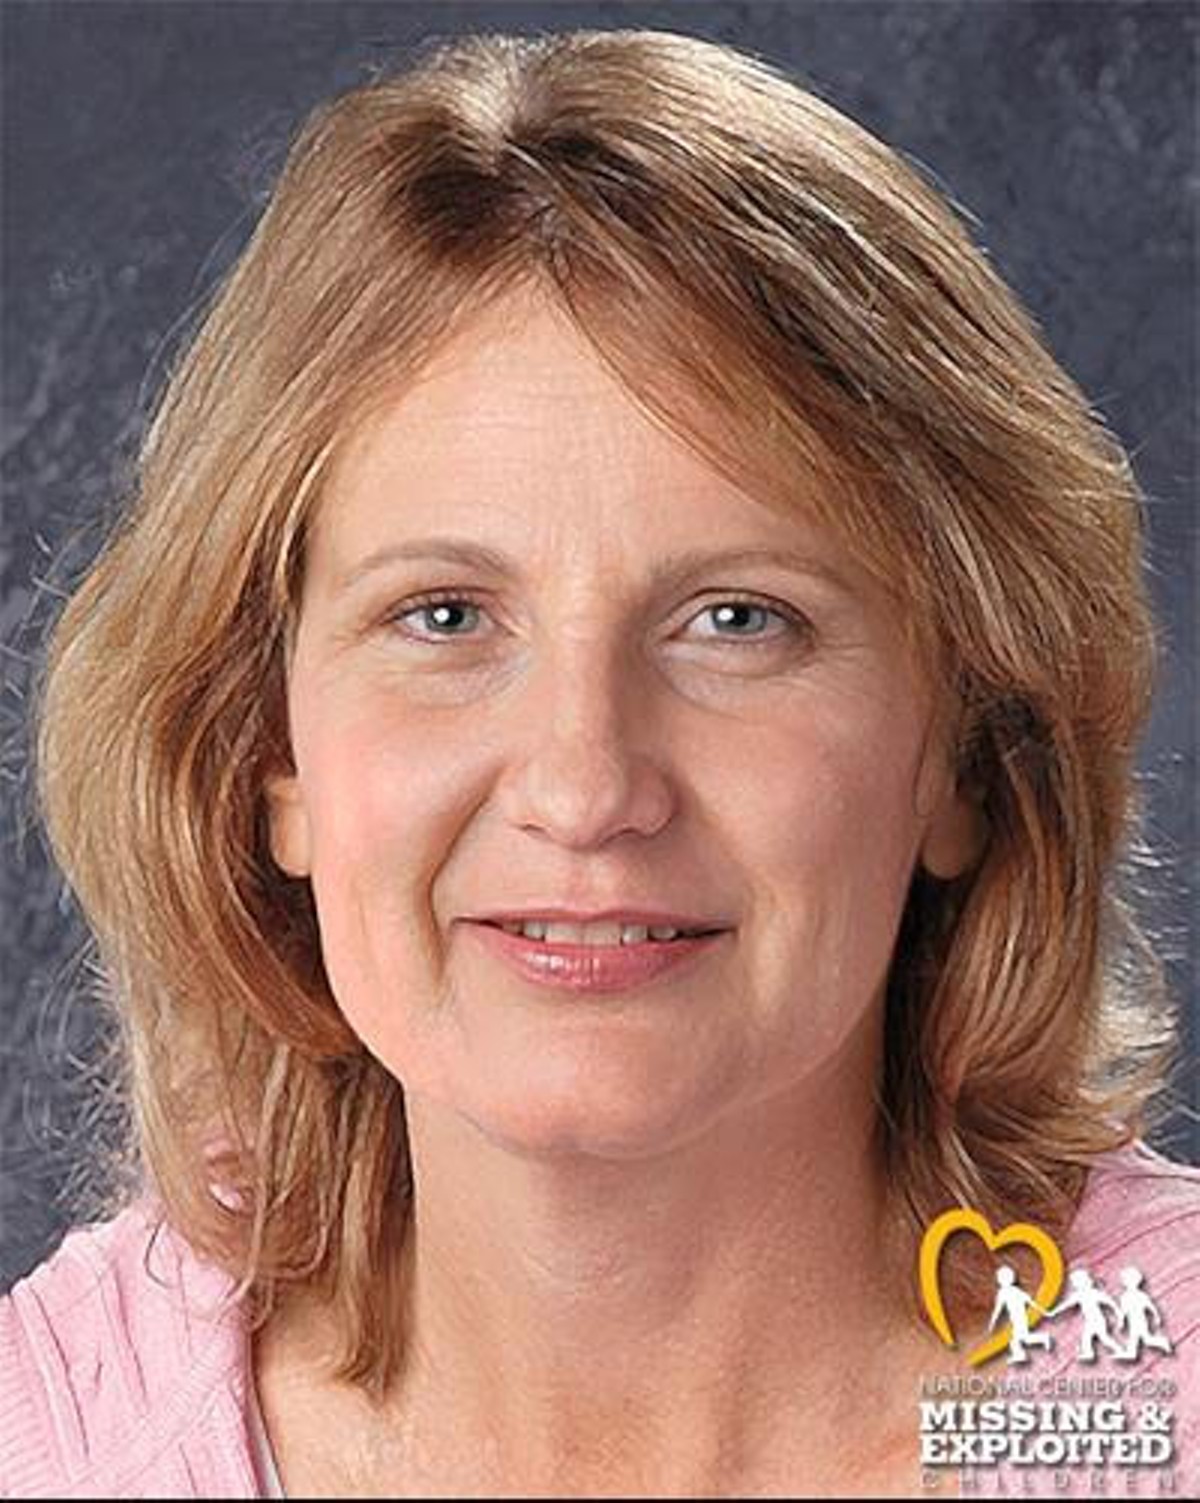 Tammy Surdam, as shown in an age progression photo of what she might look like today.